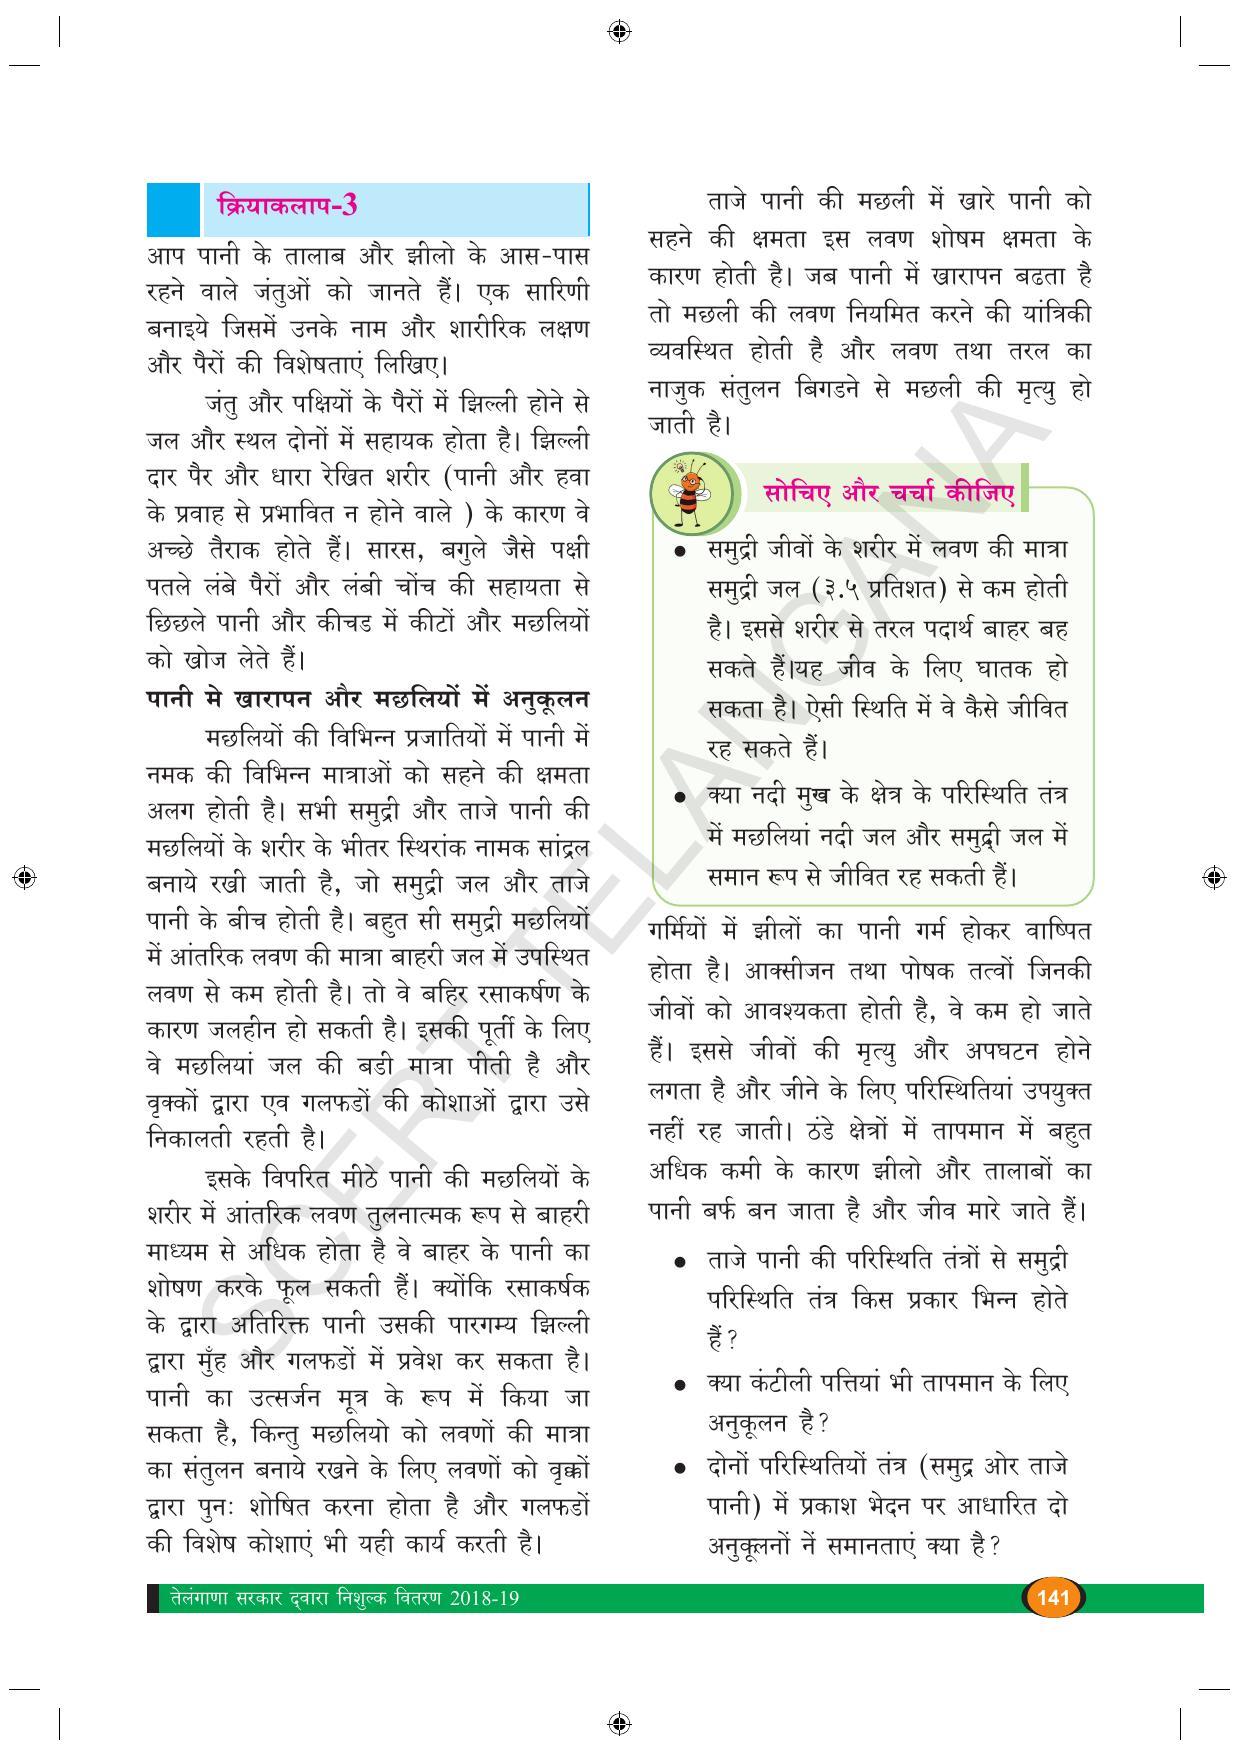 TS SCERT Class 9 Biological Science (Hindi Medium) Text Book - Page 153